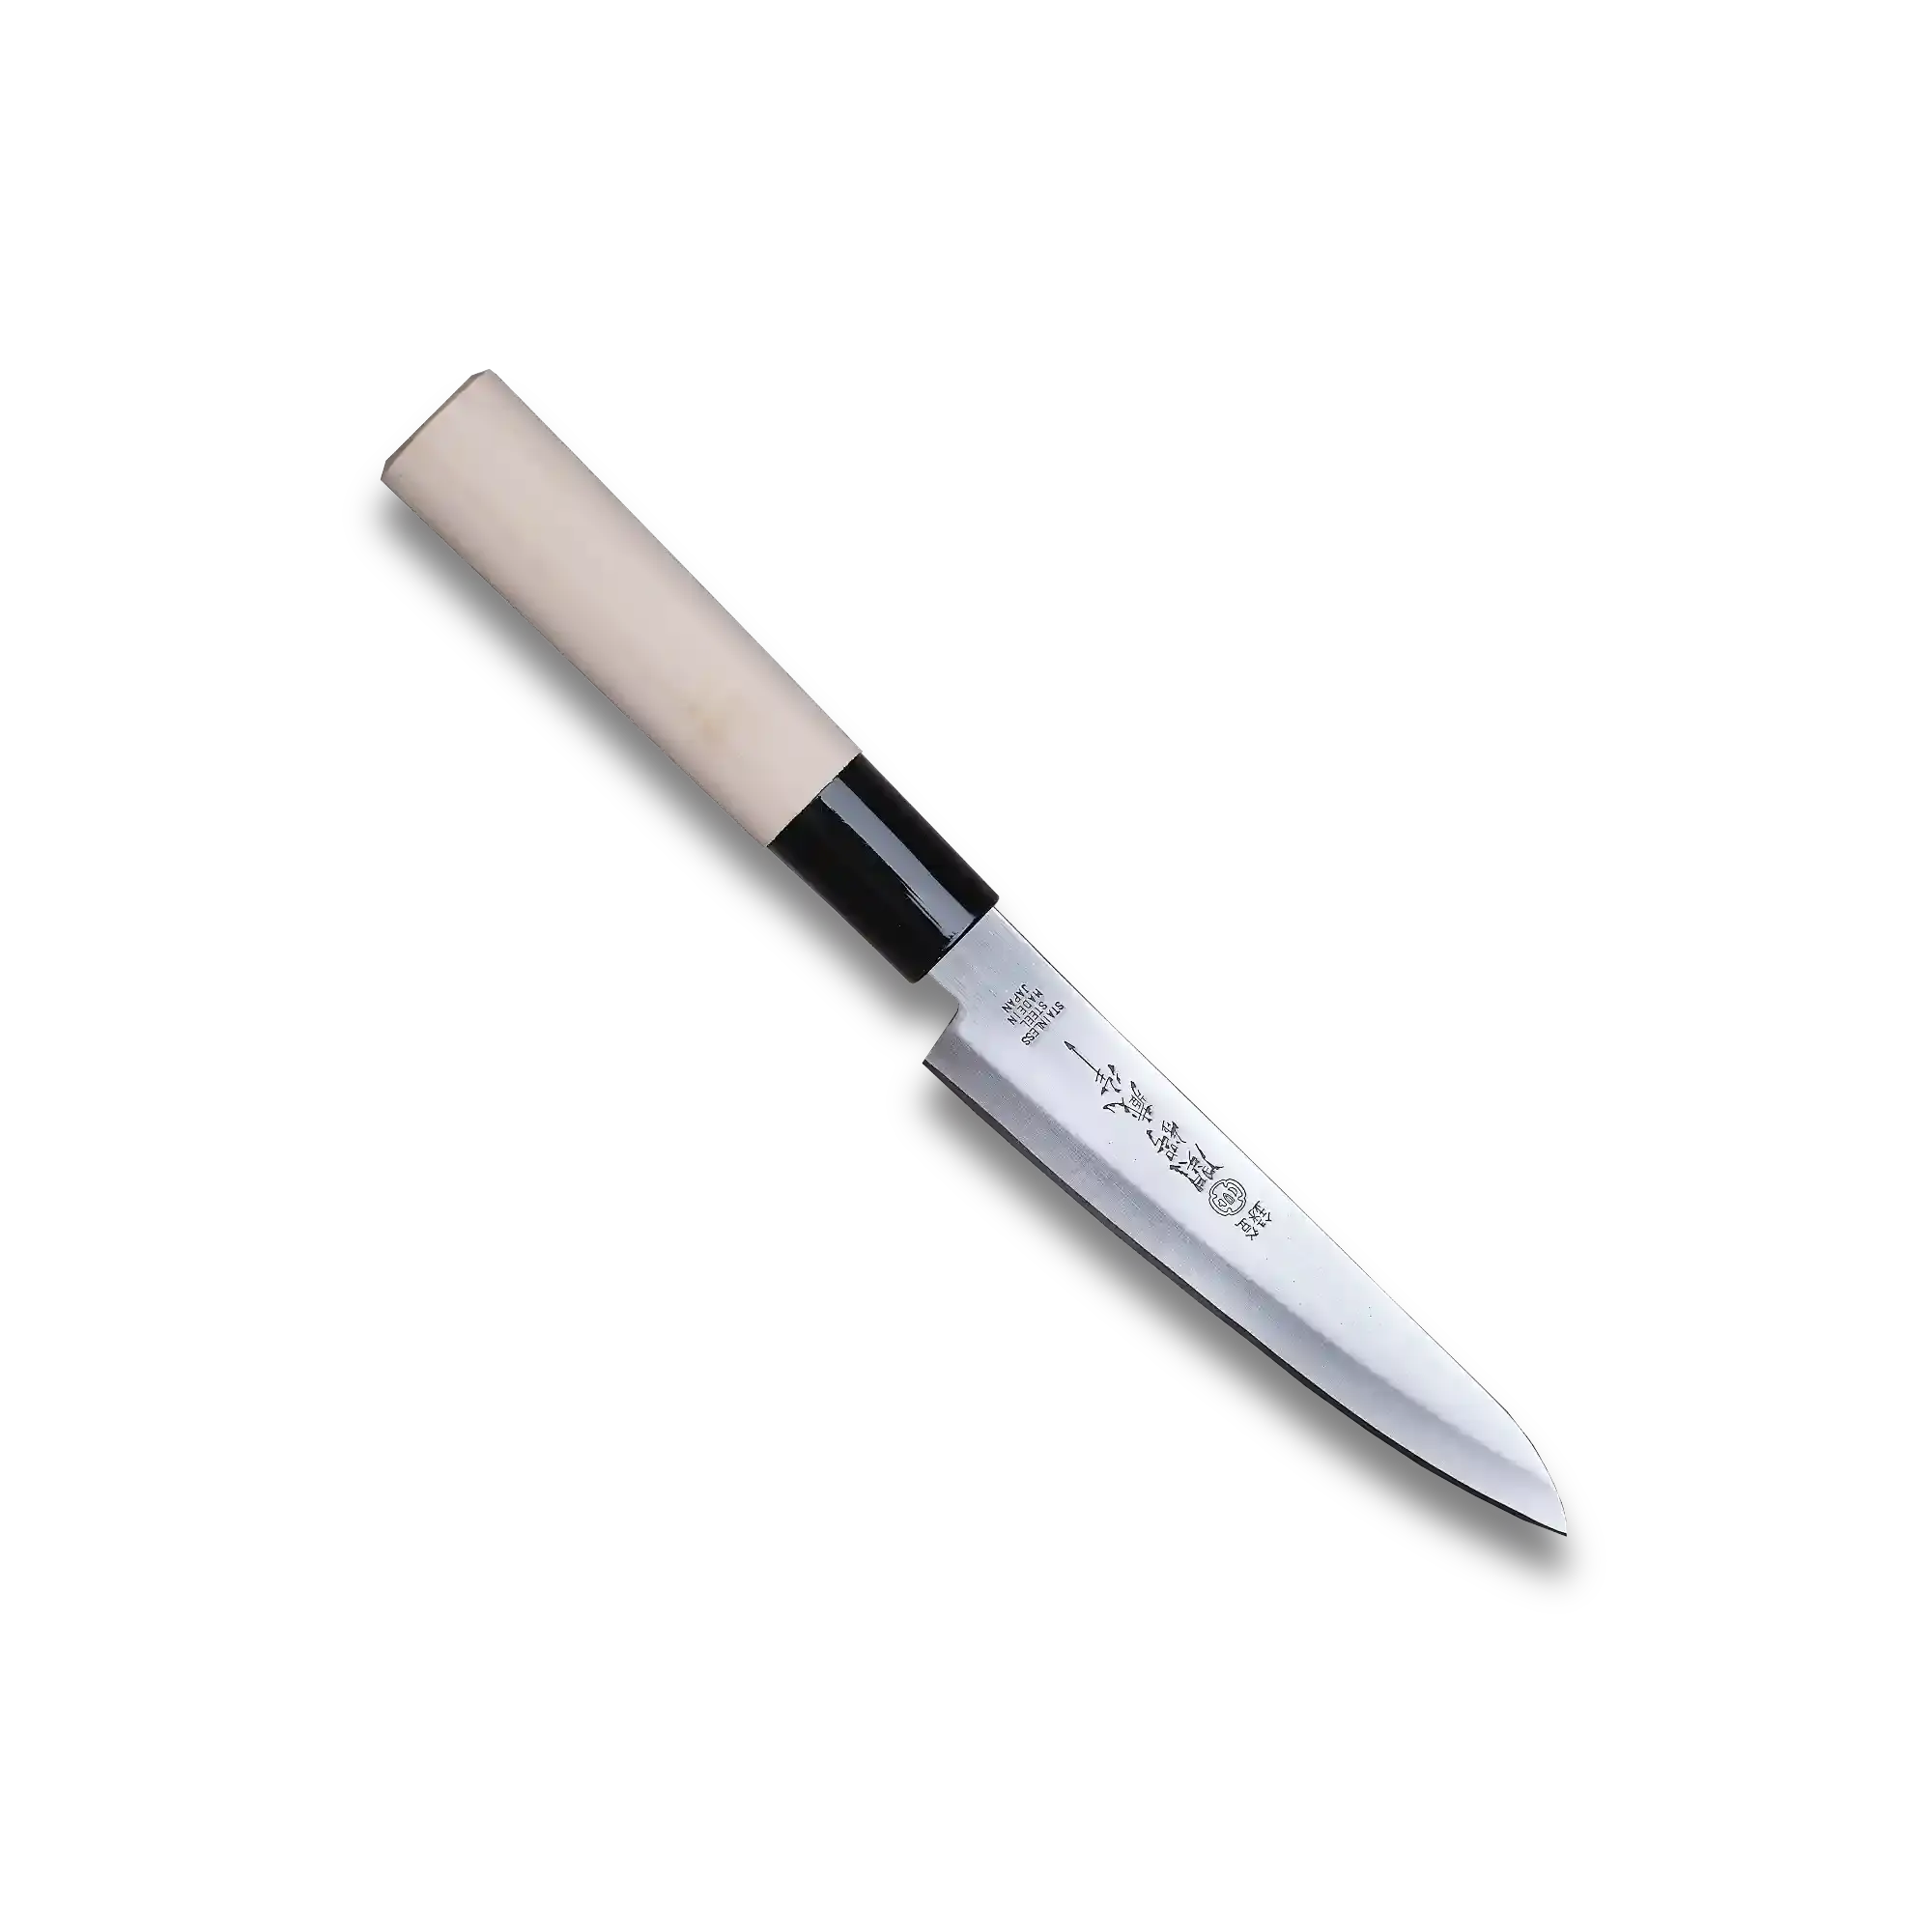 Tsubazo - Petty Knife 120mm- Stainless Steel blade | Made in Japan